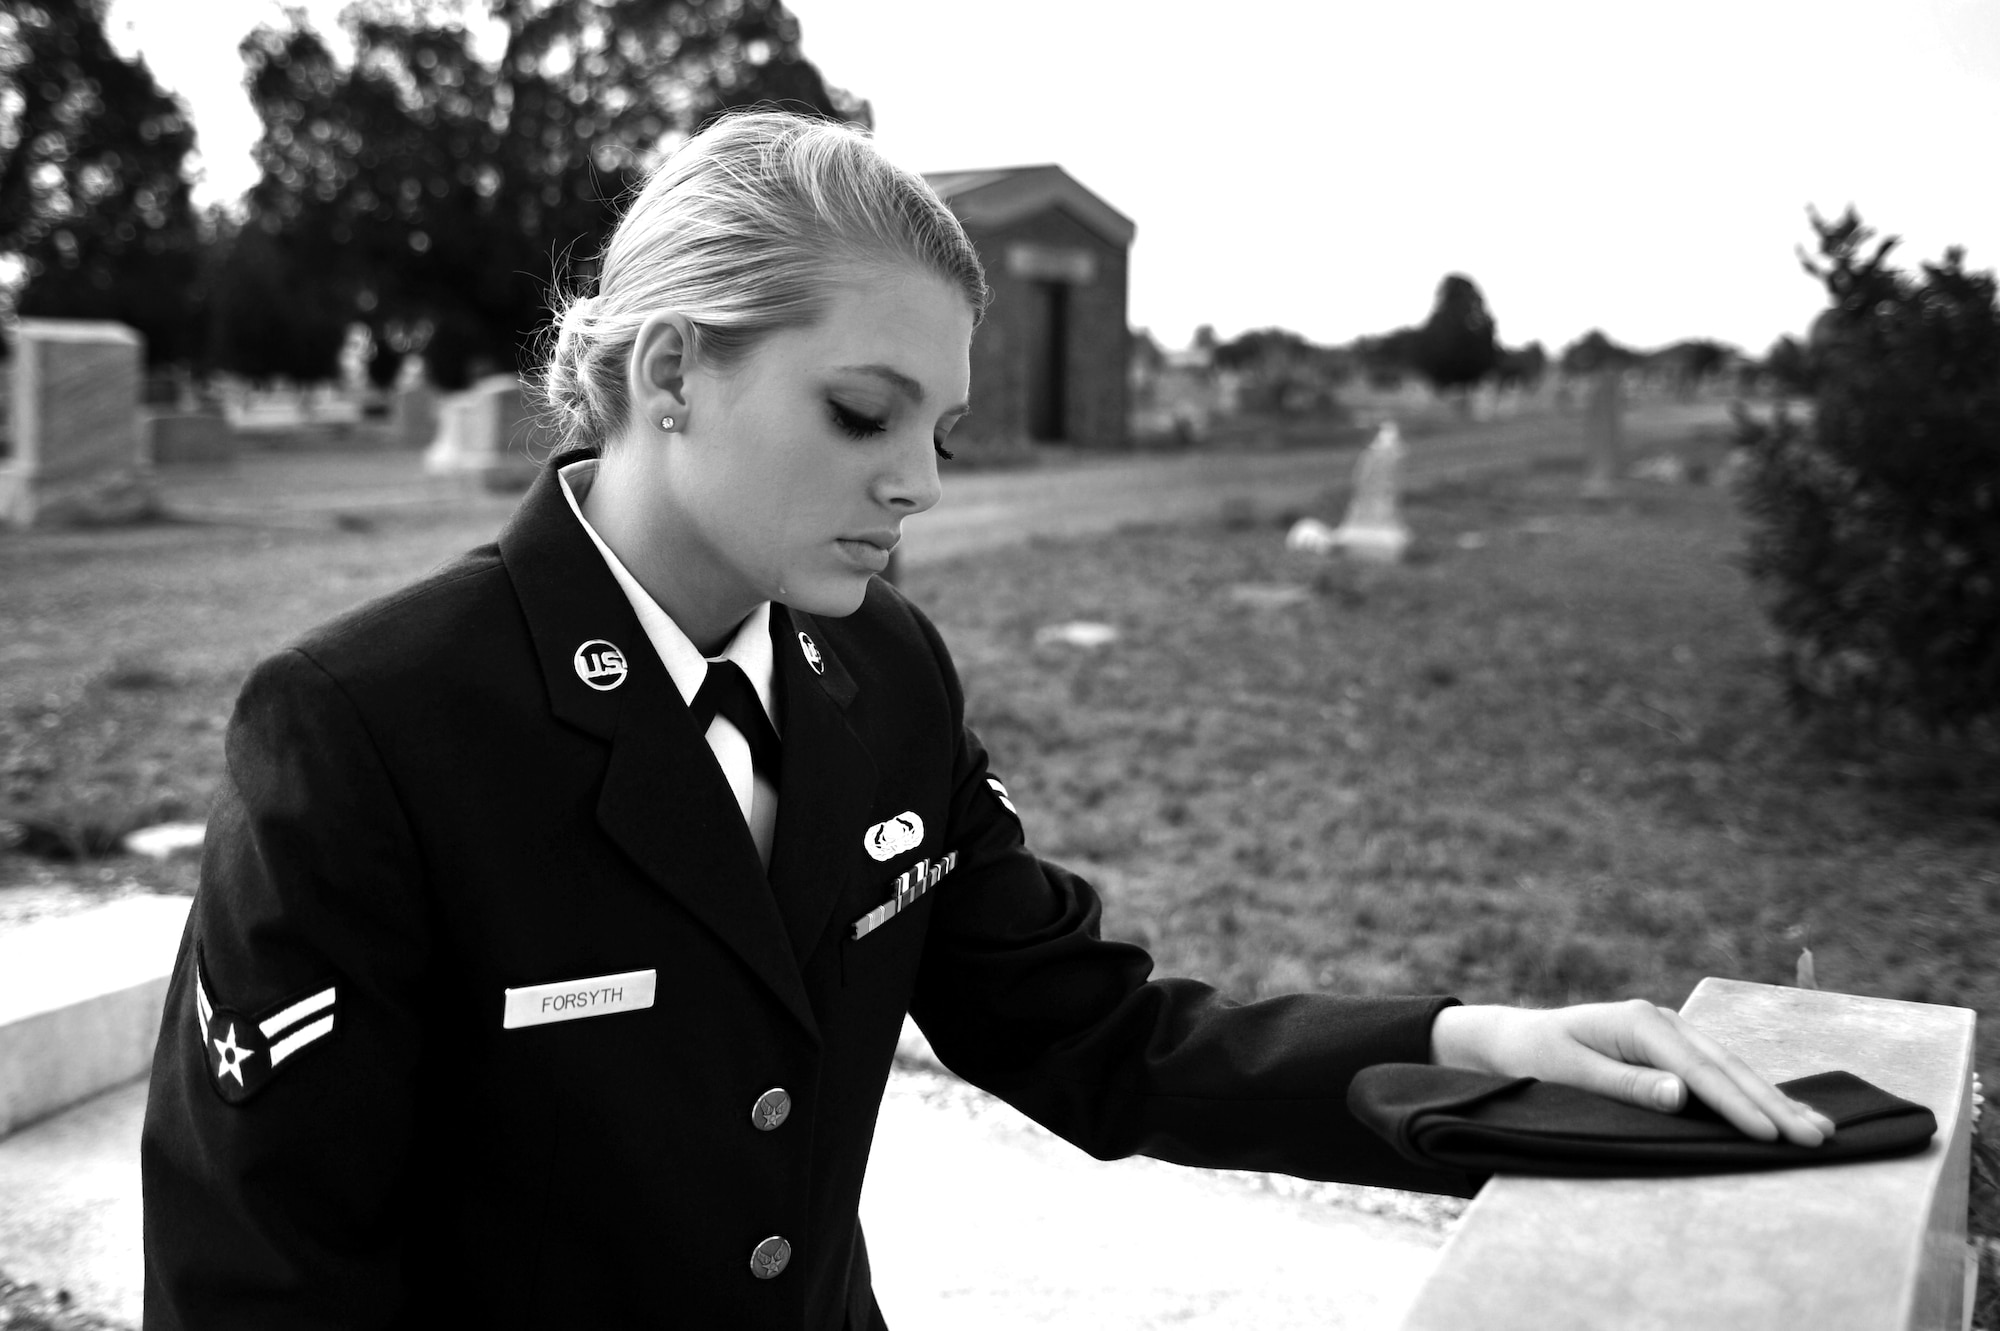 U.S. Air Force Airman 1st Class Daisey Forsyth, 27th Special Operations Communications Squadron knowledge operations manager, visits the tombstone of a fellow Airman who lost their life in an alcohol related incident near Cannon Air Force Base, May 20, 2011. Air Commandos are reminded of the risks involved with drinking and are urged to never let anyone drive while intoxicated. (U.S. Air Force photo illustration by Airman 1st Class Alexxis Pons Abascal)    